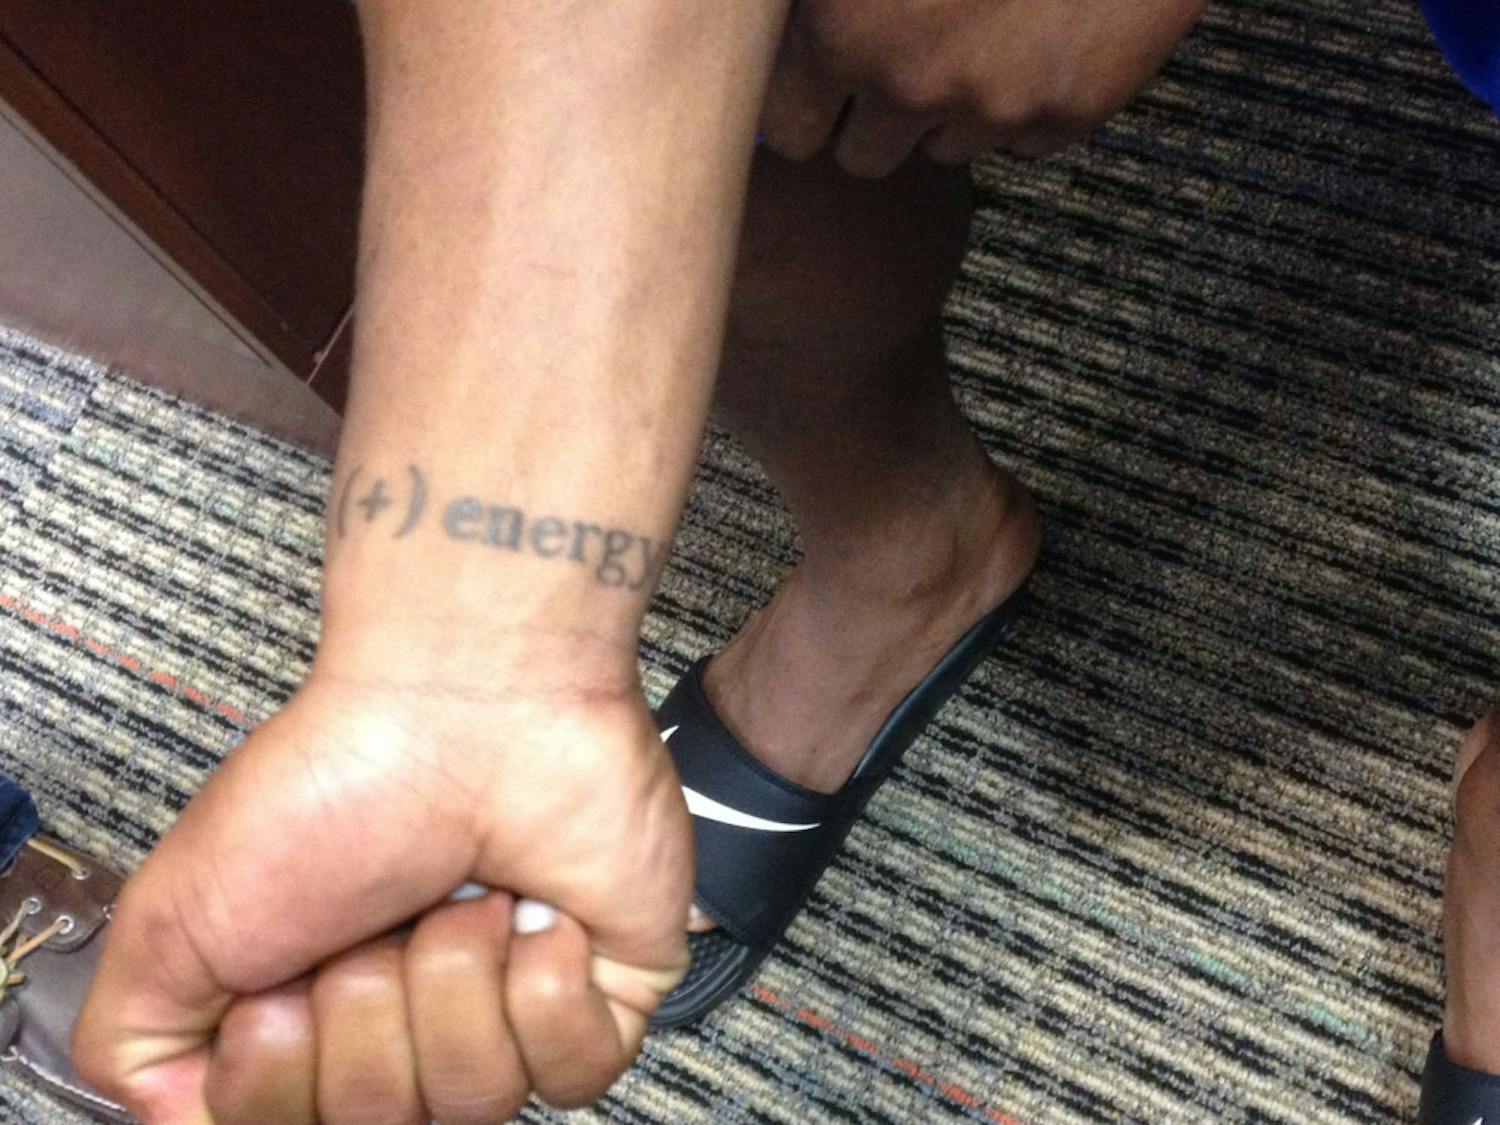 UF running back Kelvin Taylor shows off a tattoo on his right wrist that reads "(+) energy"